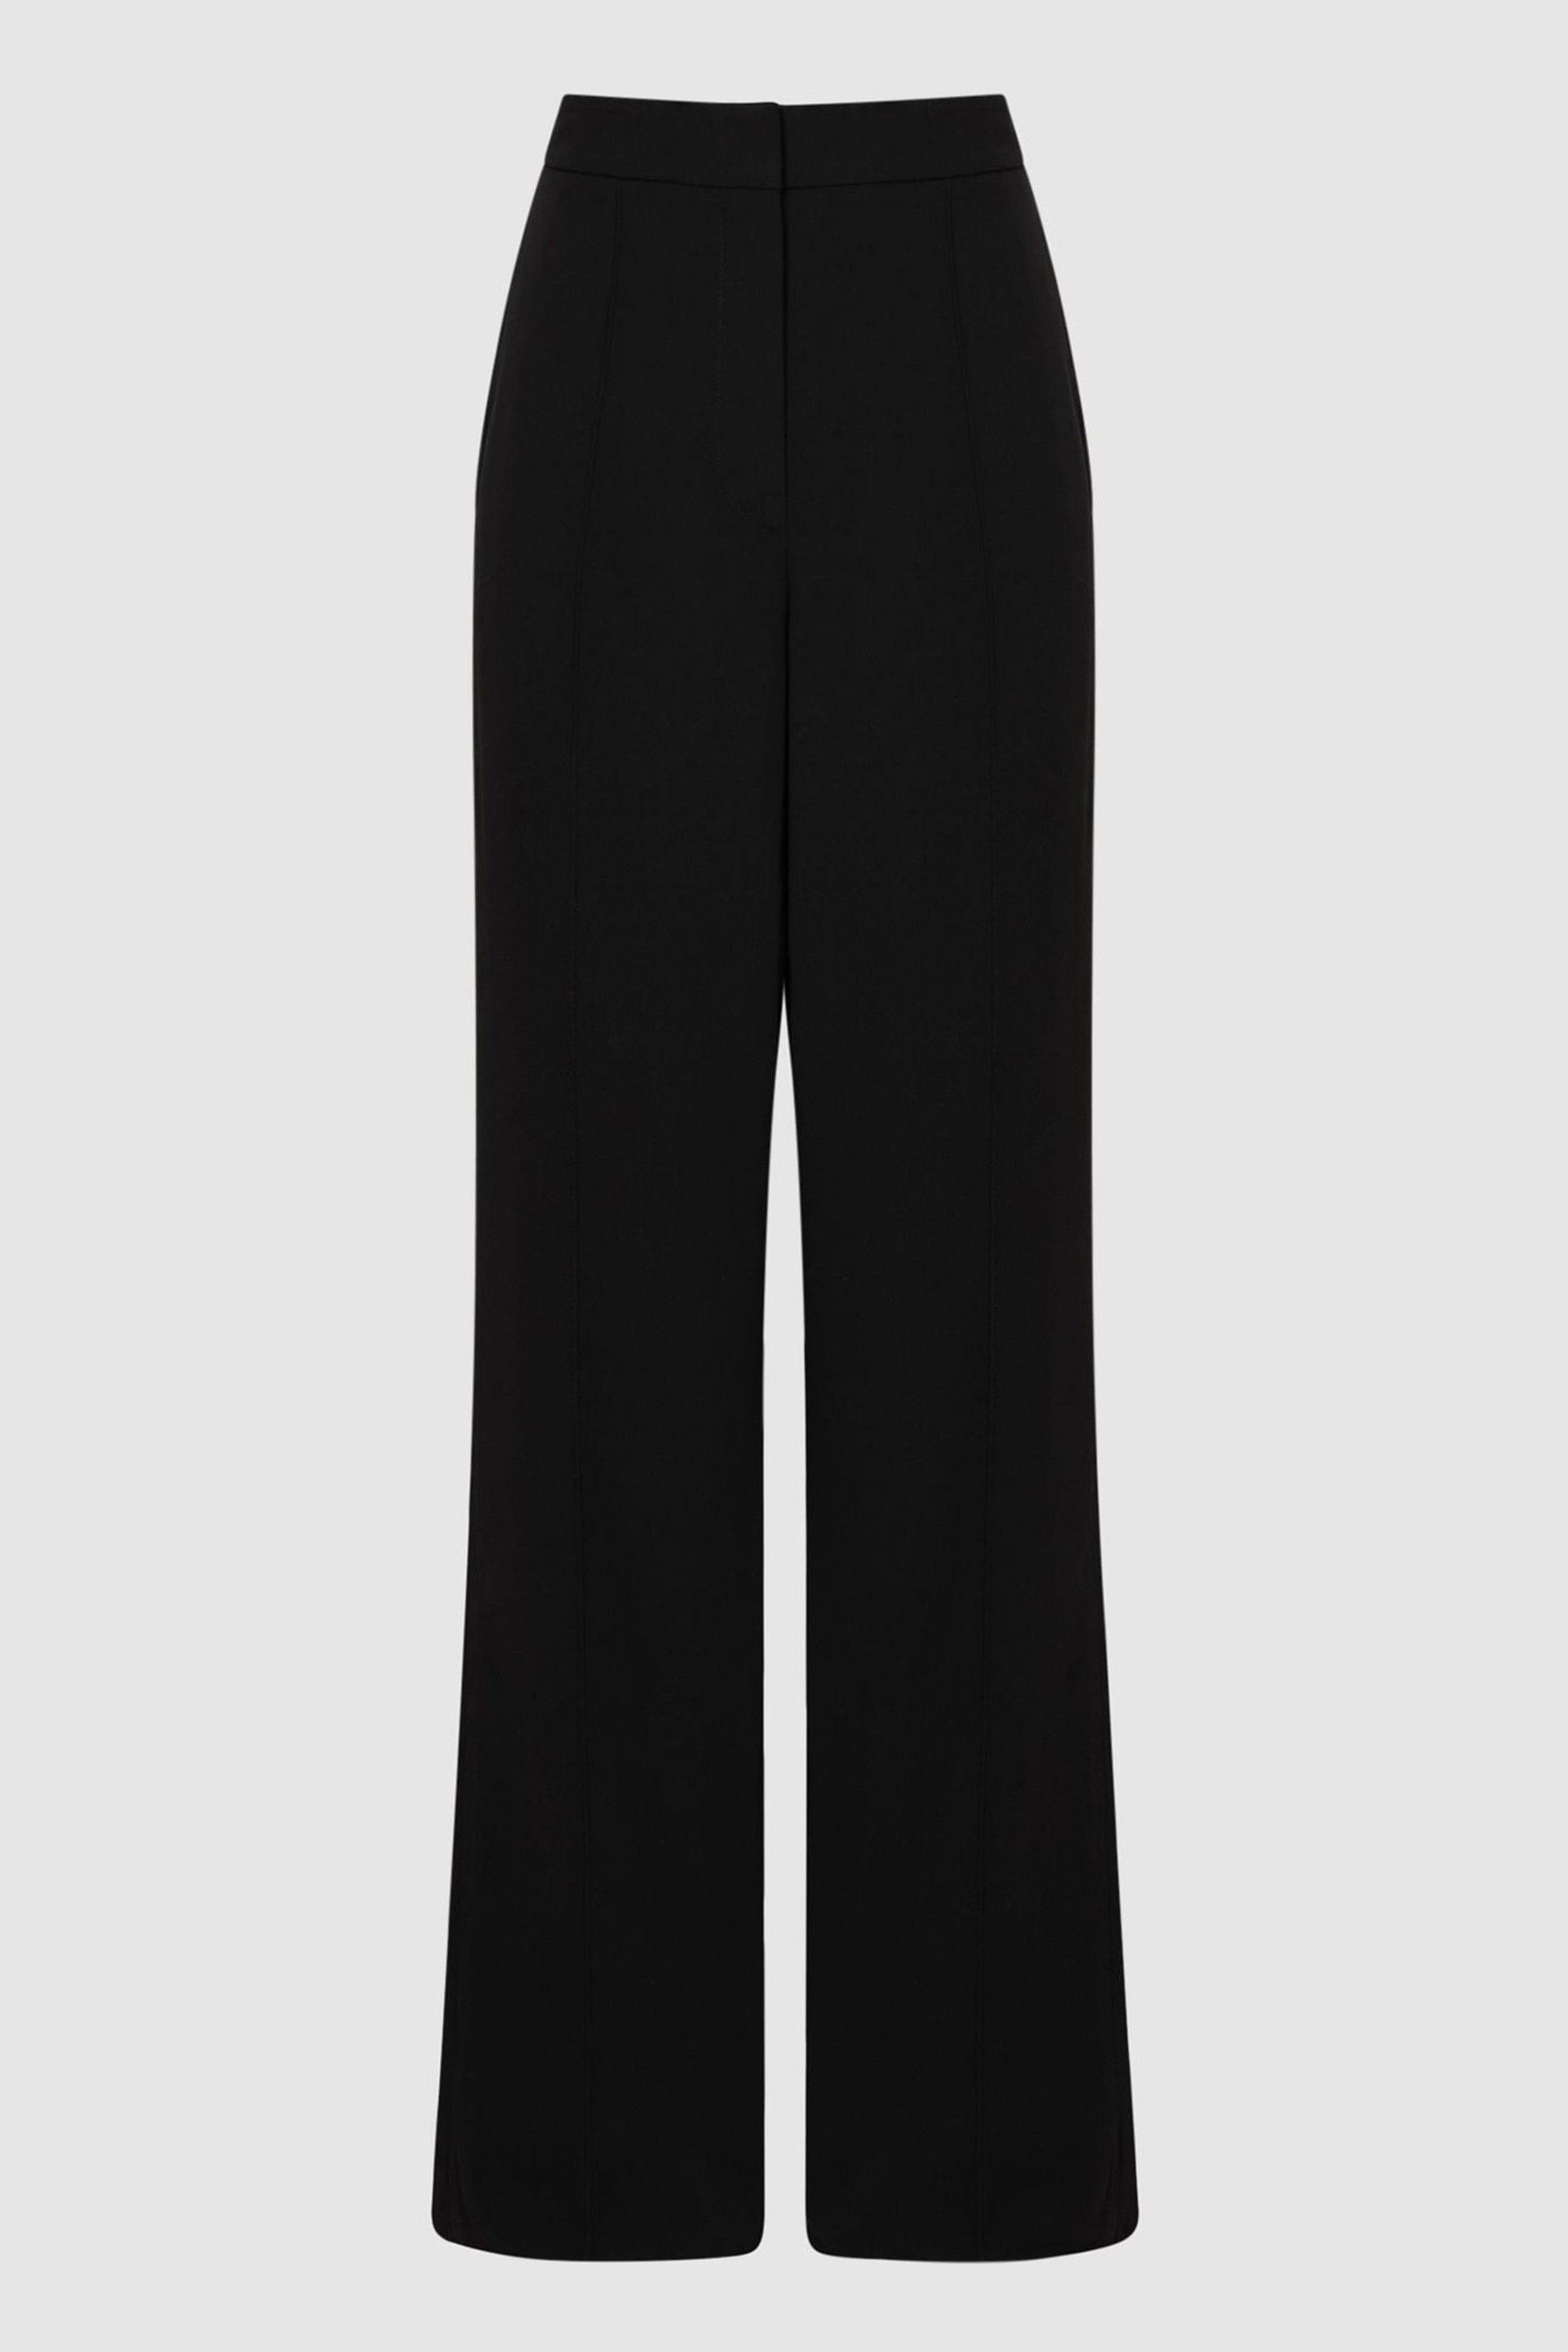 Buy Reiss Aleah Pull On Trousers from Next Ireland